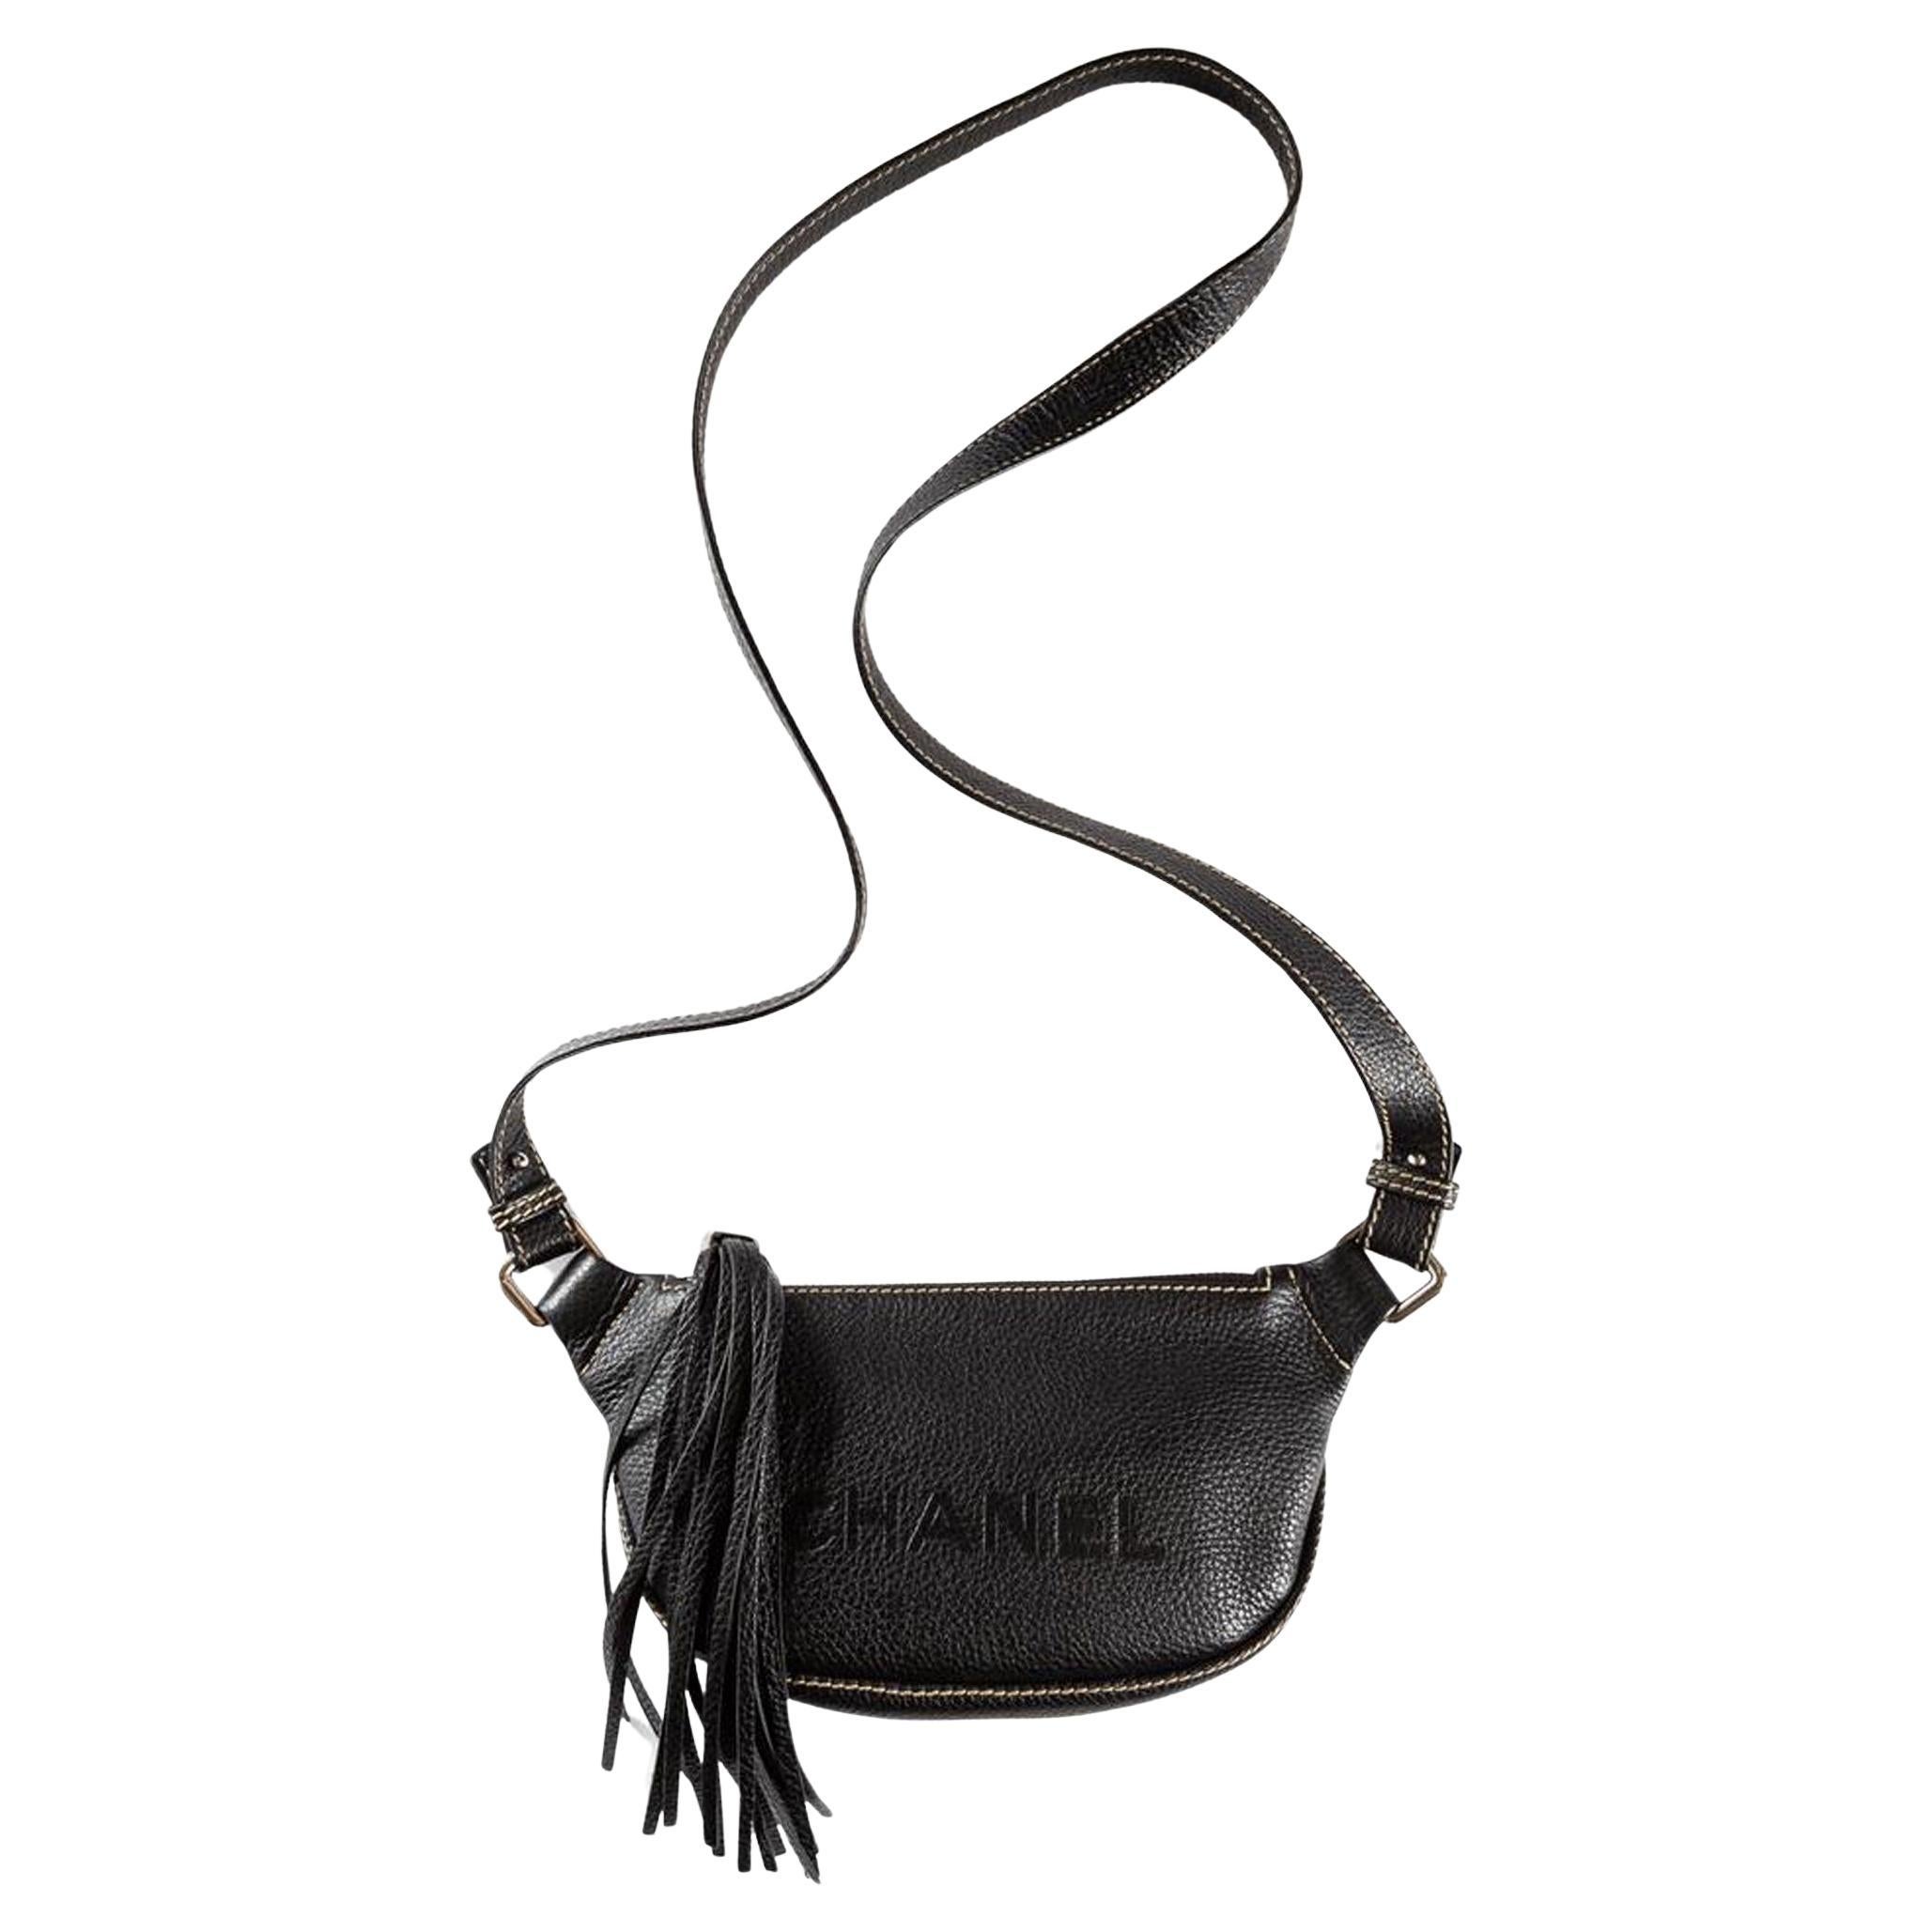 Chanel 2002 Pebbled Leather Whipstitch Crossbody Tassel Fringe Pouch Bag For Sale